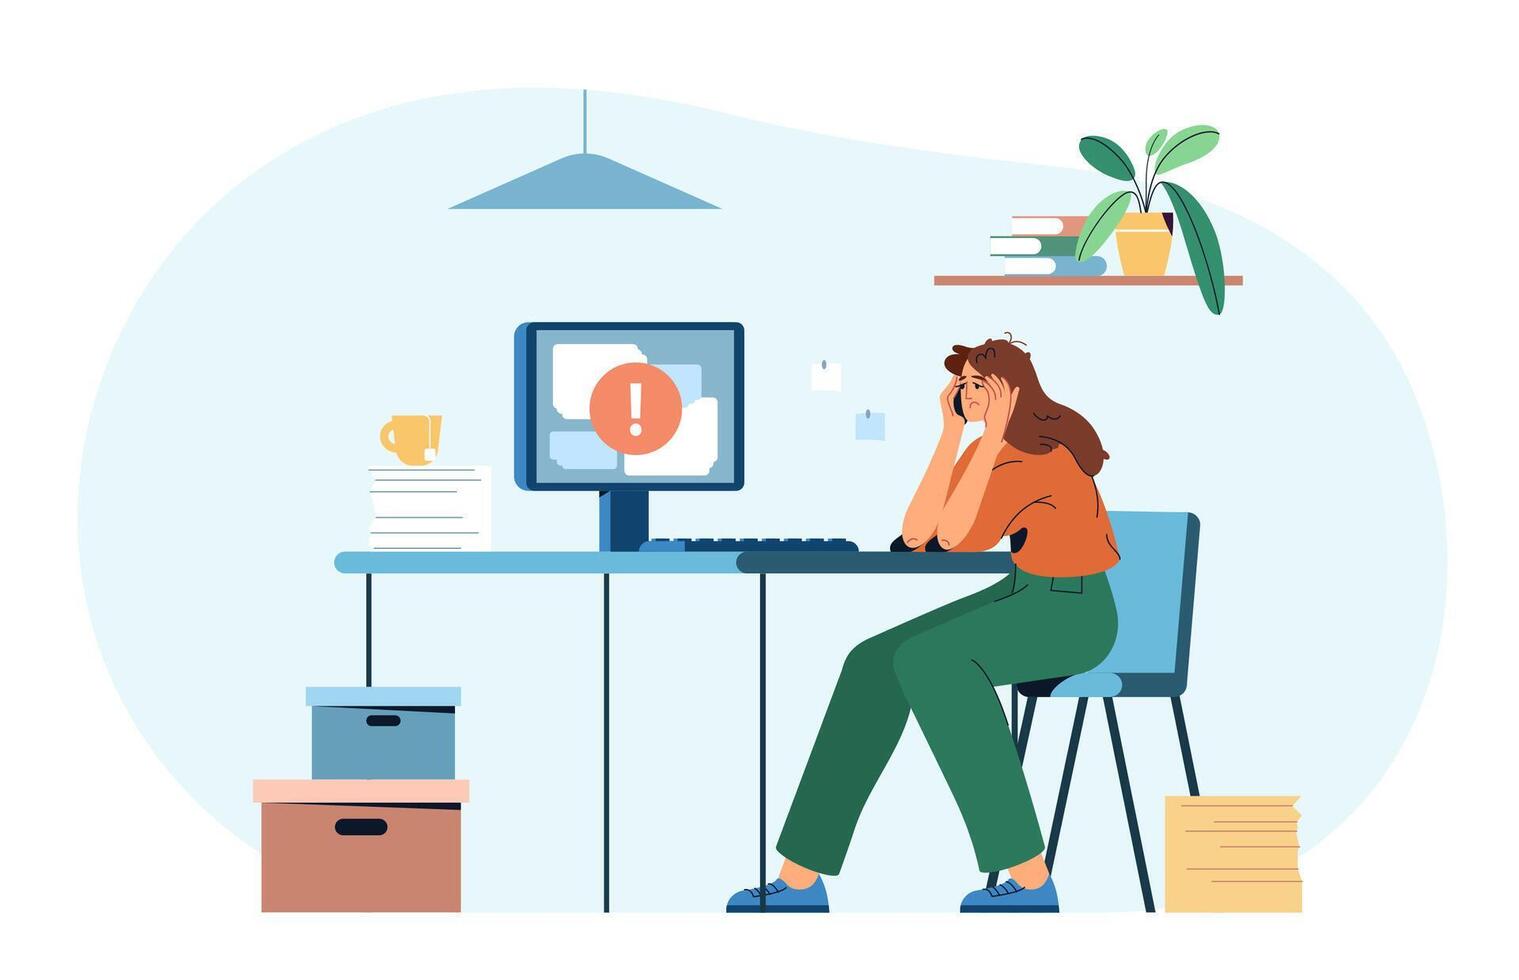 Flat tired exhausted woman office worker at computer desk on workplace. Woman with low energy levels. Professional burnout syndrome. Concept of stress, tiredness, overworked or mental health problems vector